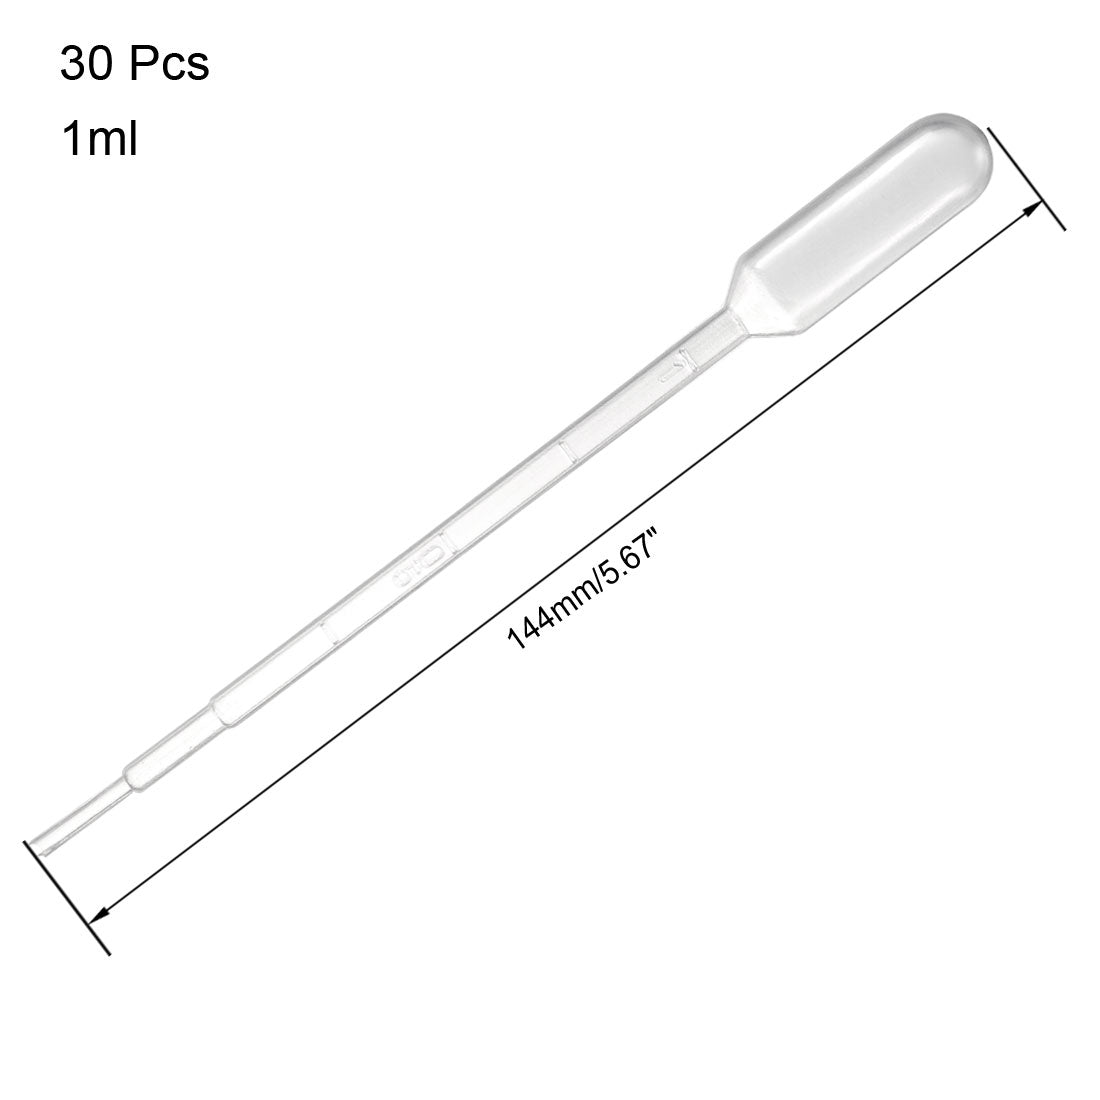 uxcell Uxcell 30 Pcs 1ml Disposable Pasteur Pipettes Test Tubes Liquid Drop Droppers Graduated 144mm Long